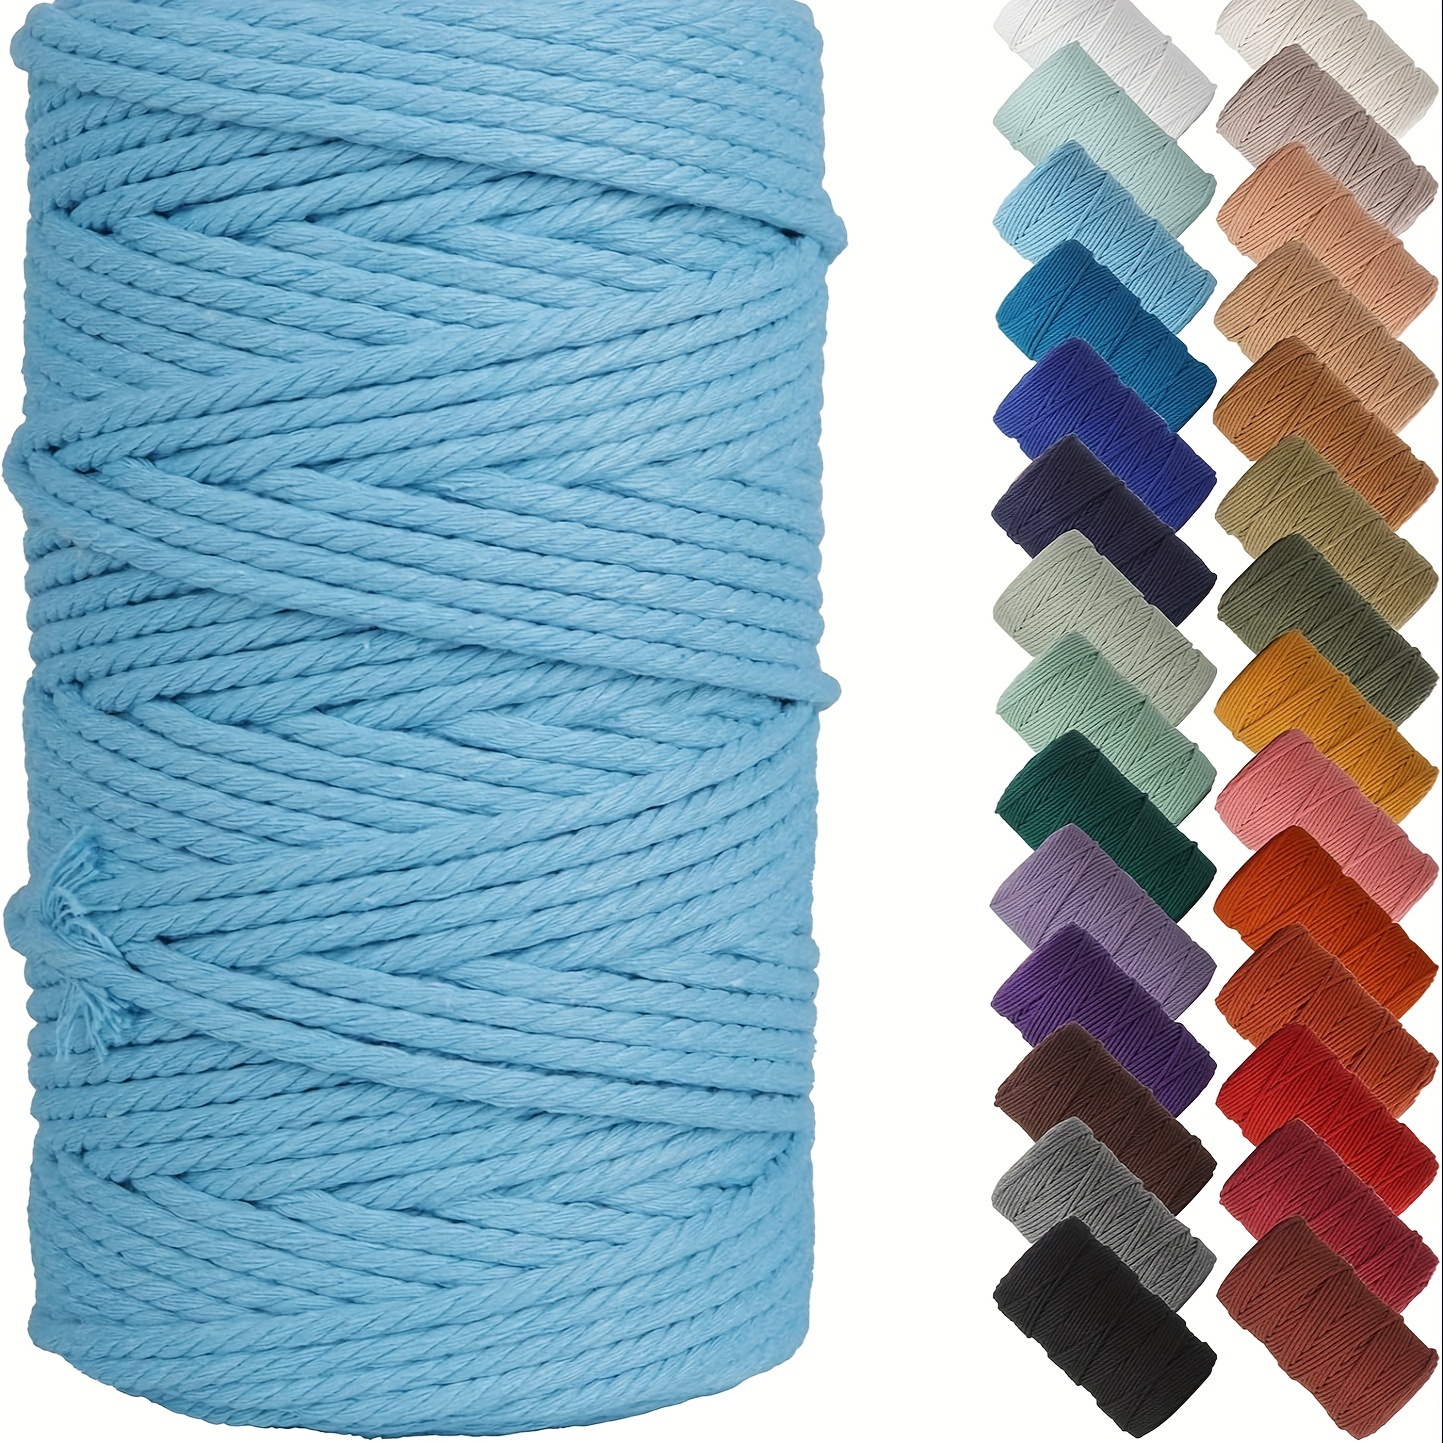 100 Yards Cotton Twisted Cord Craft Macrame String Decorative Tag